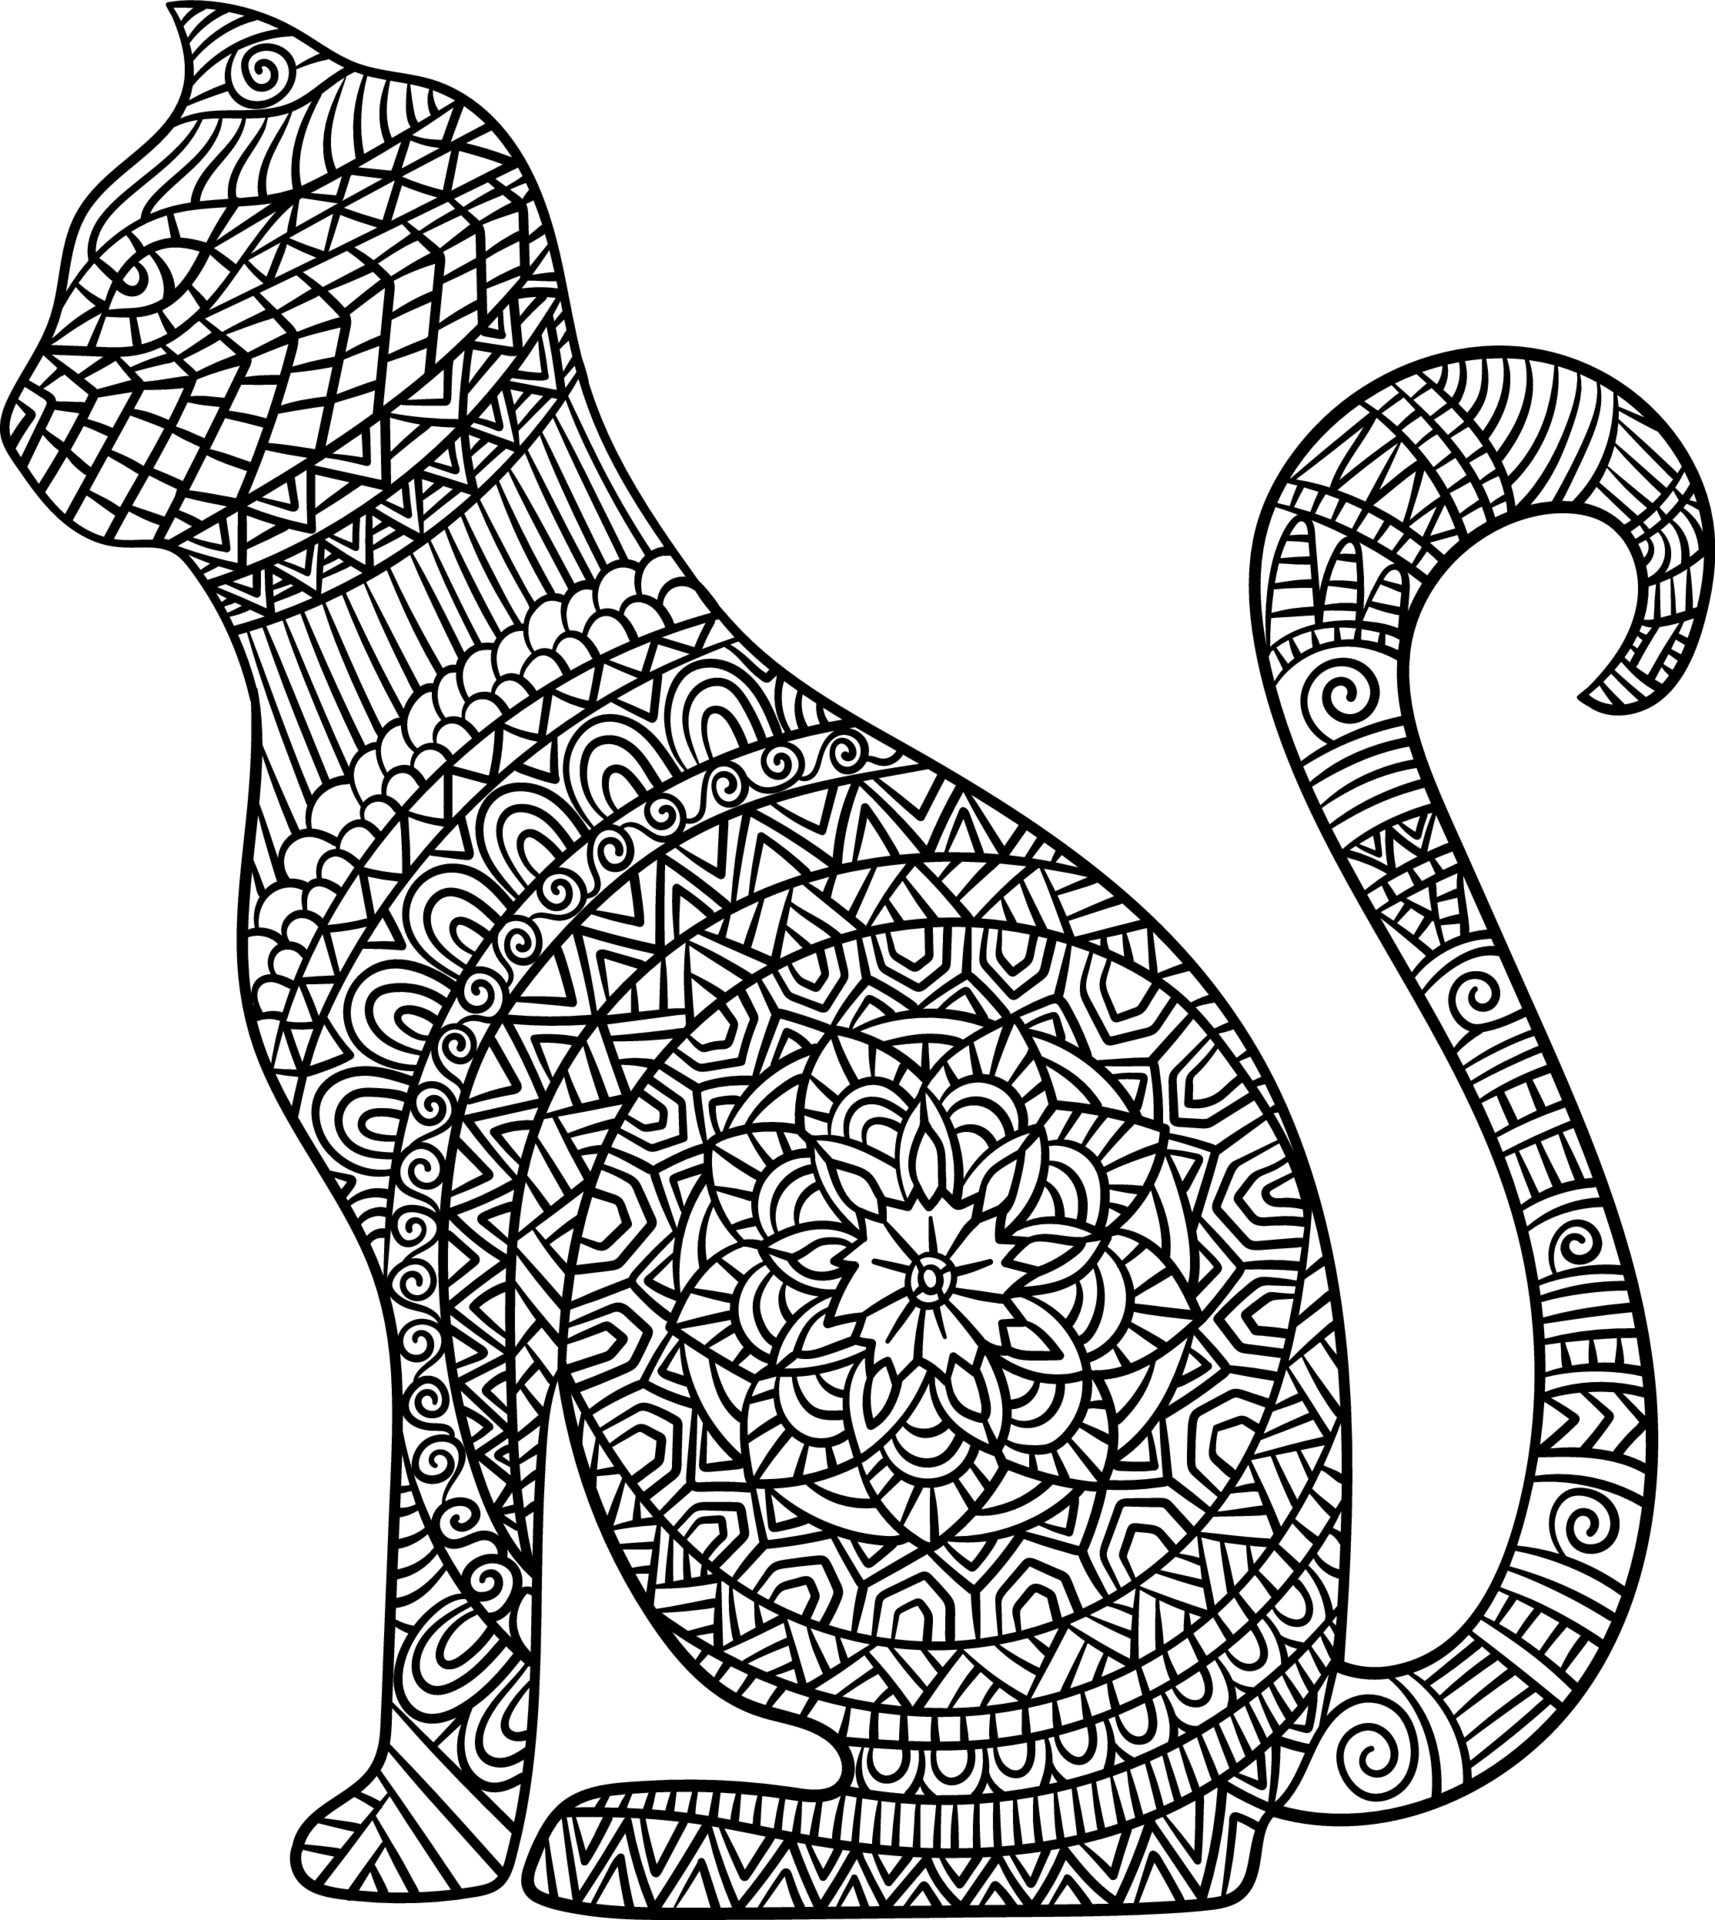 Mandala Coloring Pages For Adults Animals